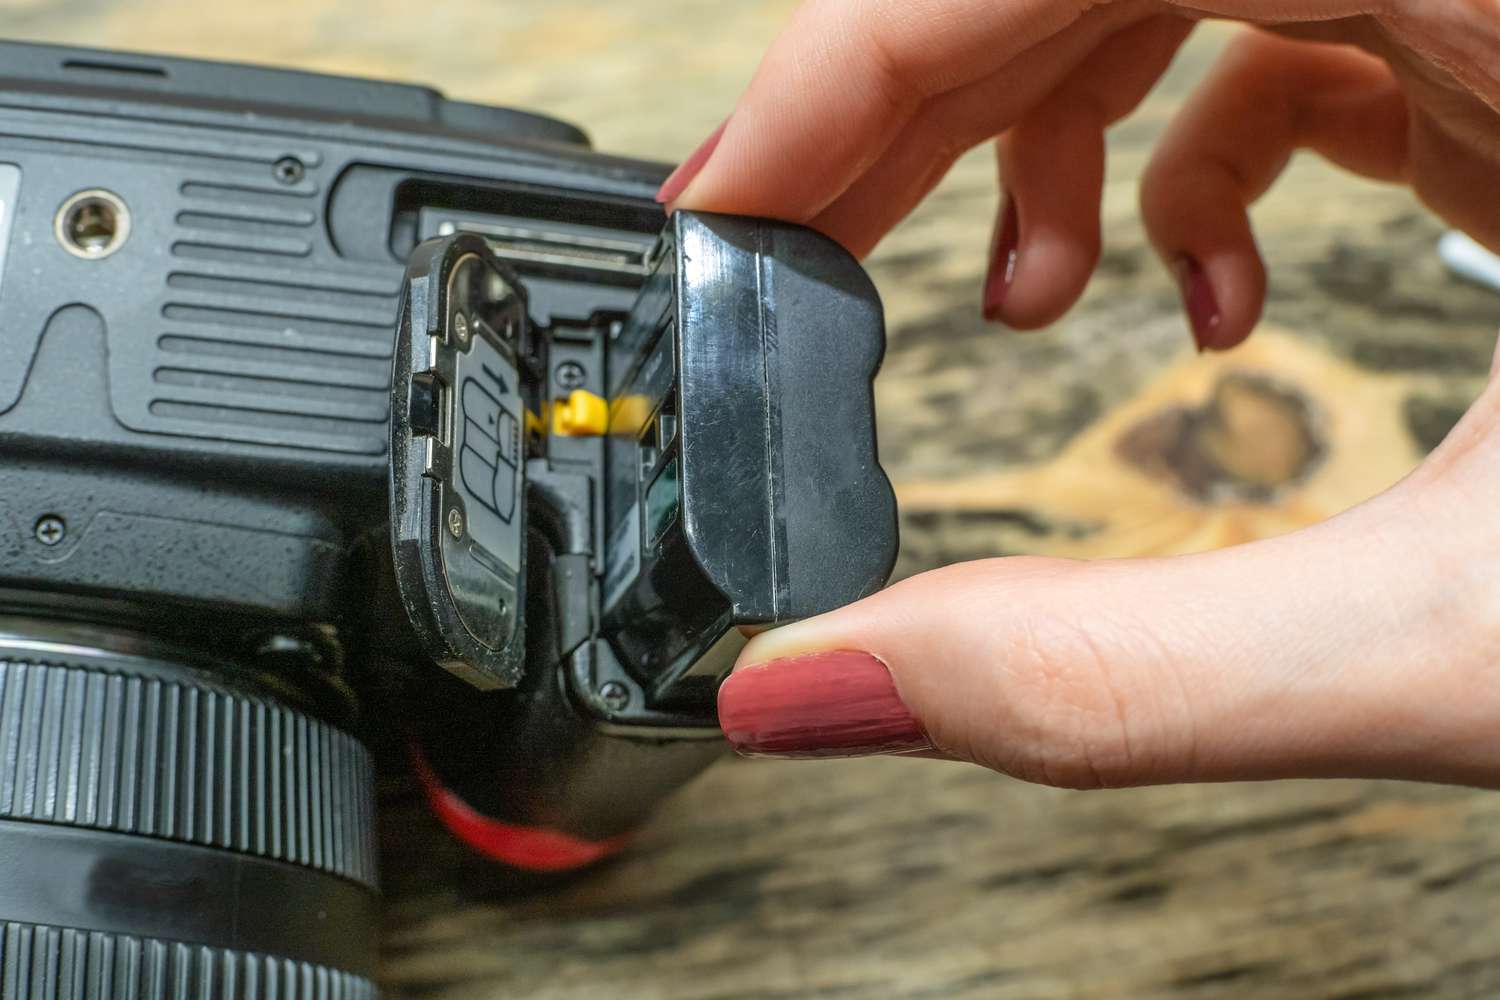 how-to-charge-a-dslr-camera-without-a-charger